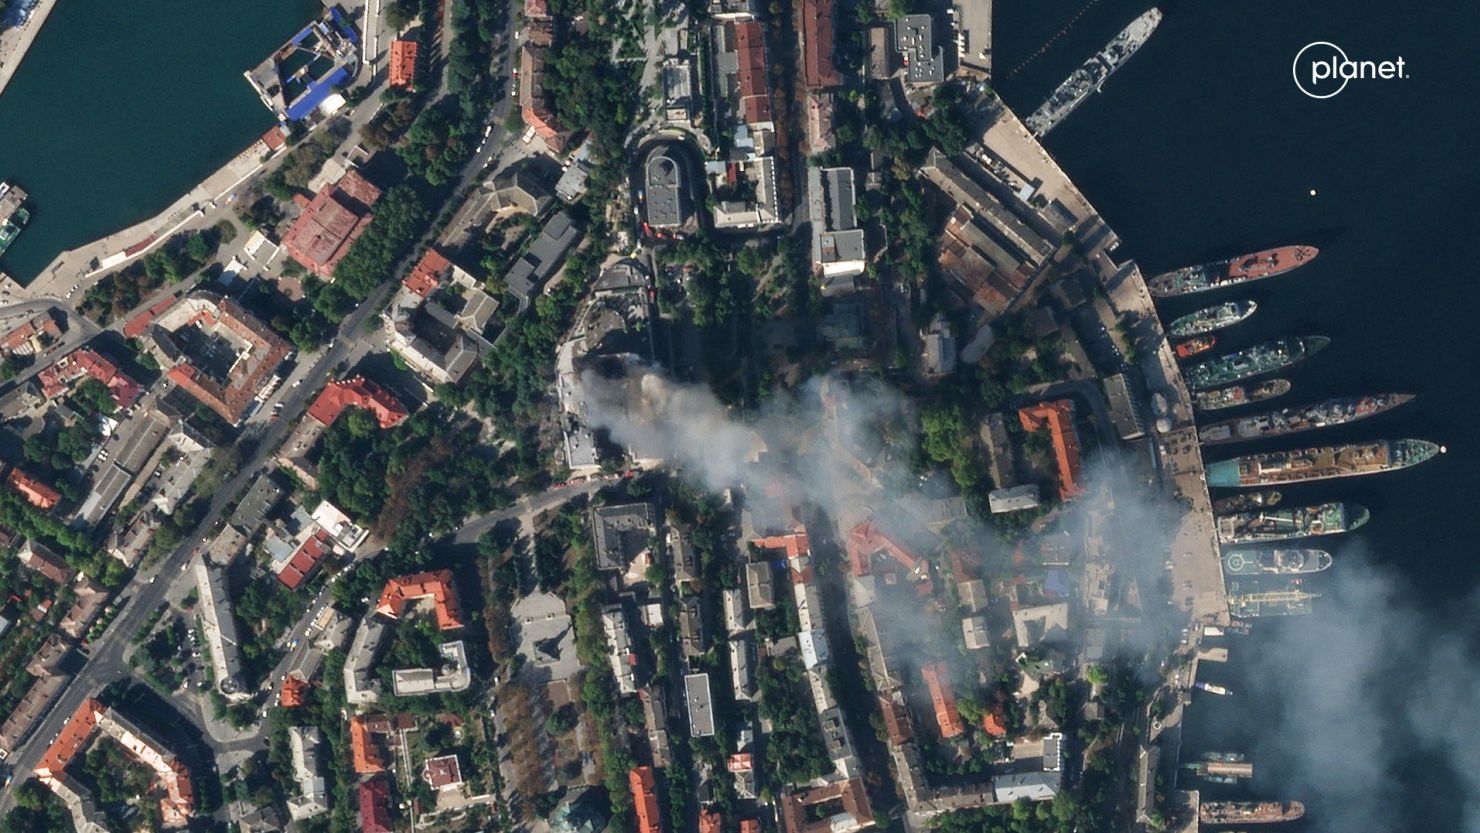 A satellite image shows smoke billowing from a Russian Black Sea Navy HQ after a missile strike in Sevastopol, Crimea, on September 22.